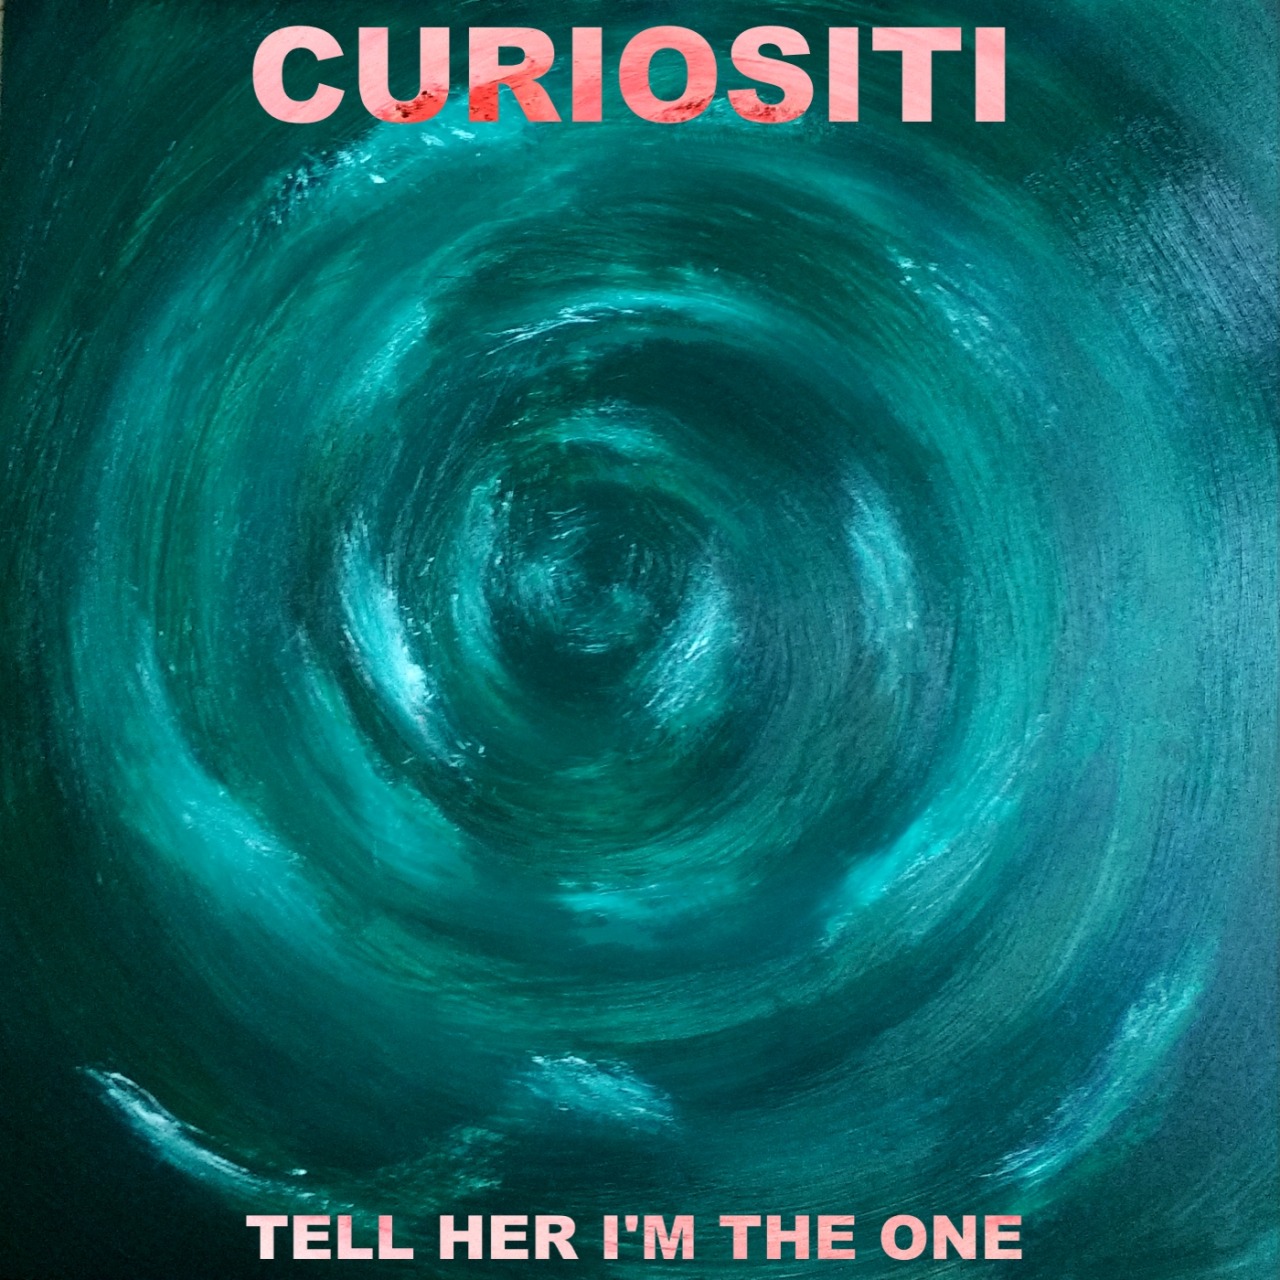 curiositi4ever:
“JUNE 26!
Tell’em it’s the one!
”
NEW BAND - FIRST SINGLE - SLATED FOR POST MIDSUMMER RELEASE.
SRY BOUT ALL CAPS. VERY EXCITED!